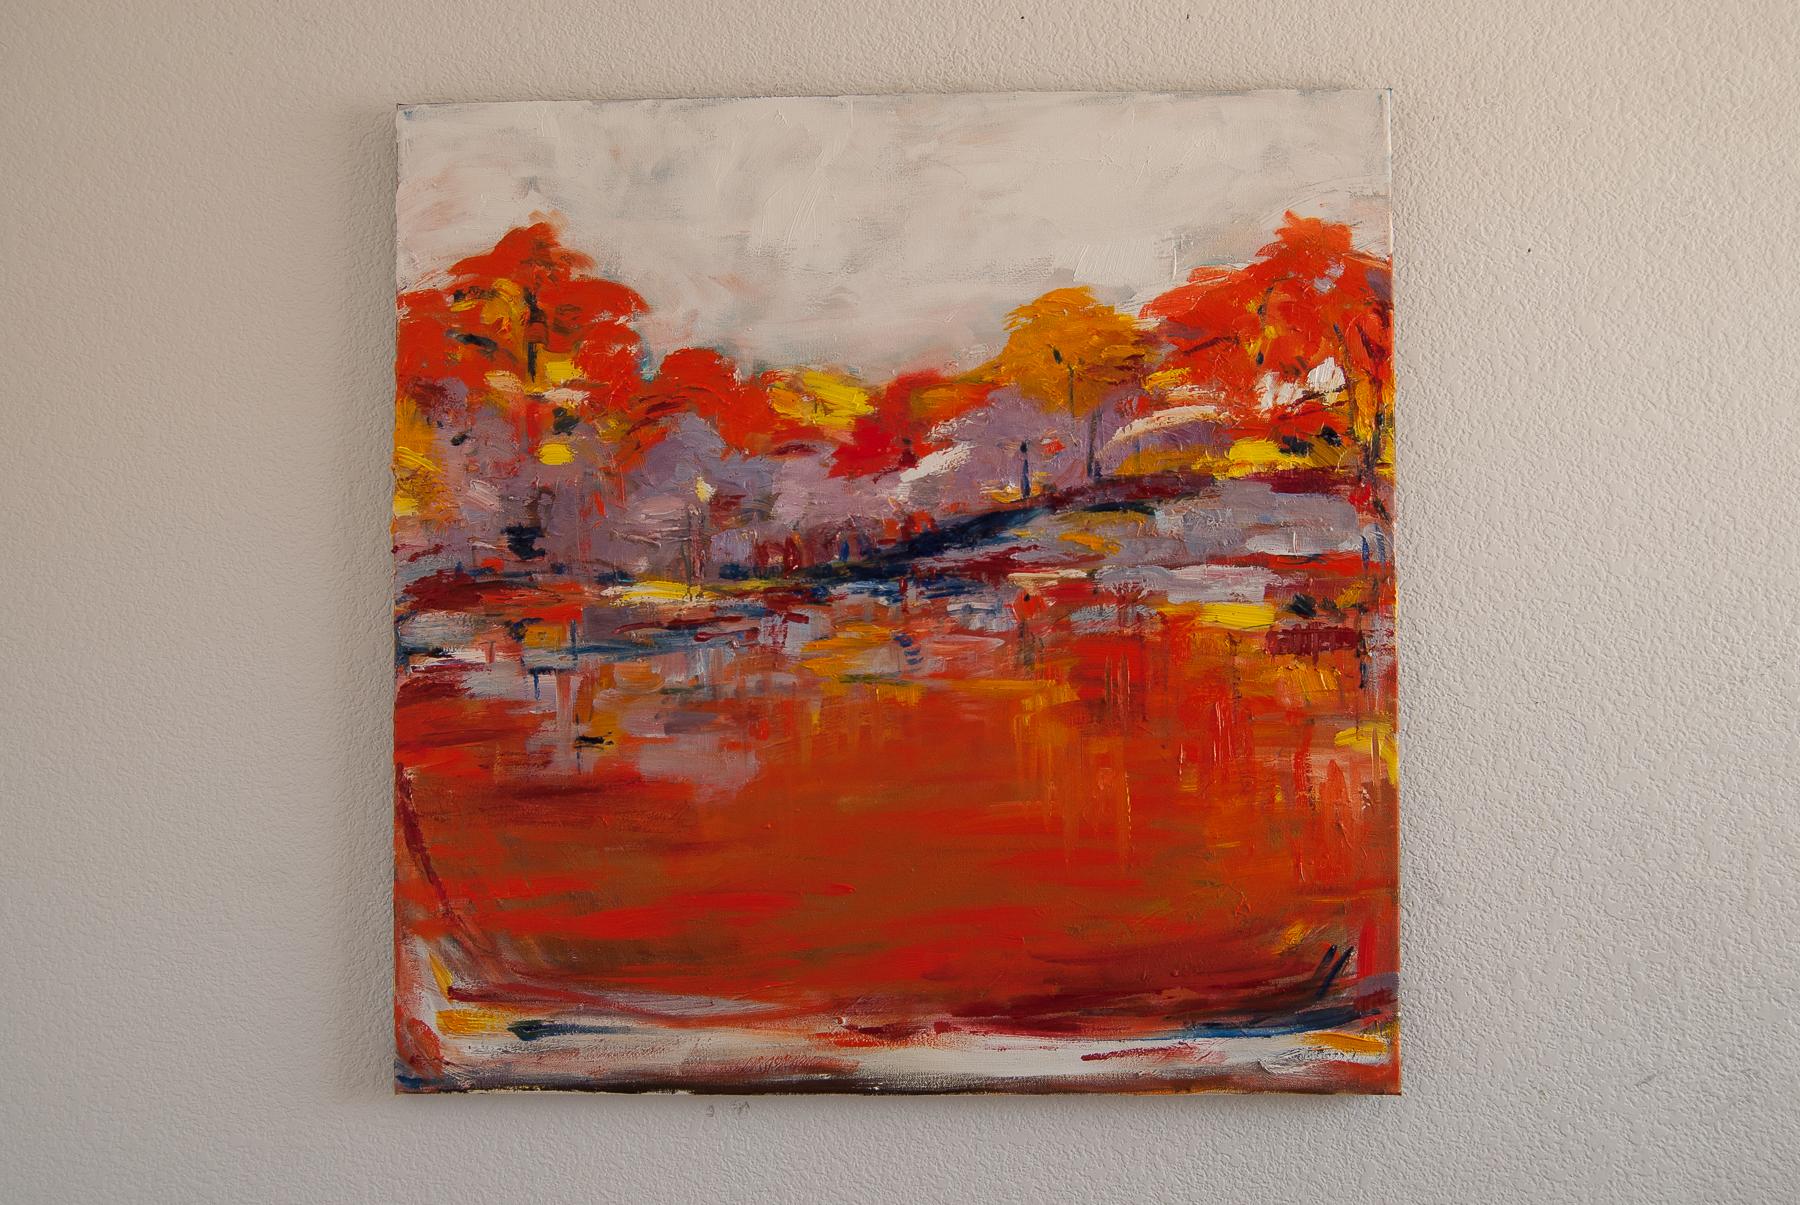 <p>Artist Comments<br>Artist Kajal Zaveri paints a vibrant abstract landscape inspired by changing seasons and the onset of fall. She draws inspiration from her trip to New York during the temperate season. The various red and orange hues of the